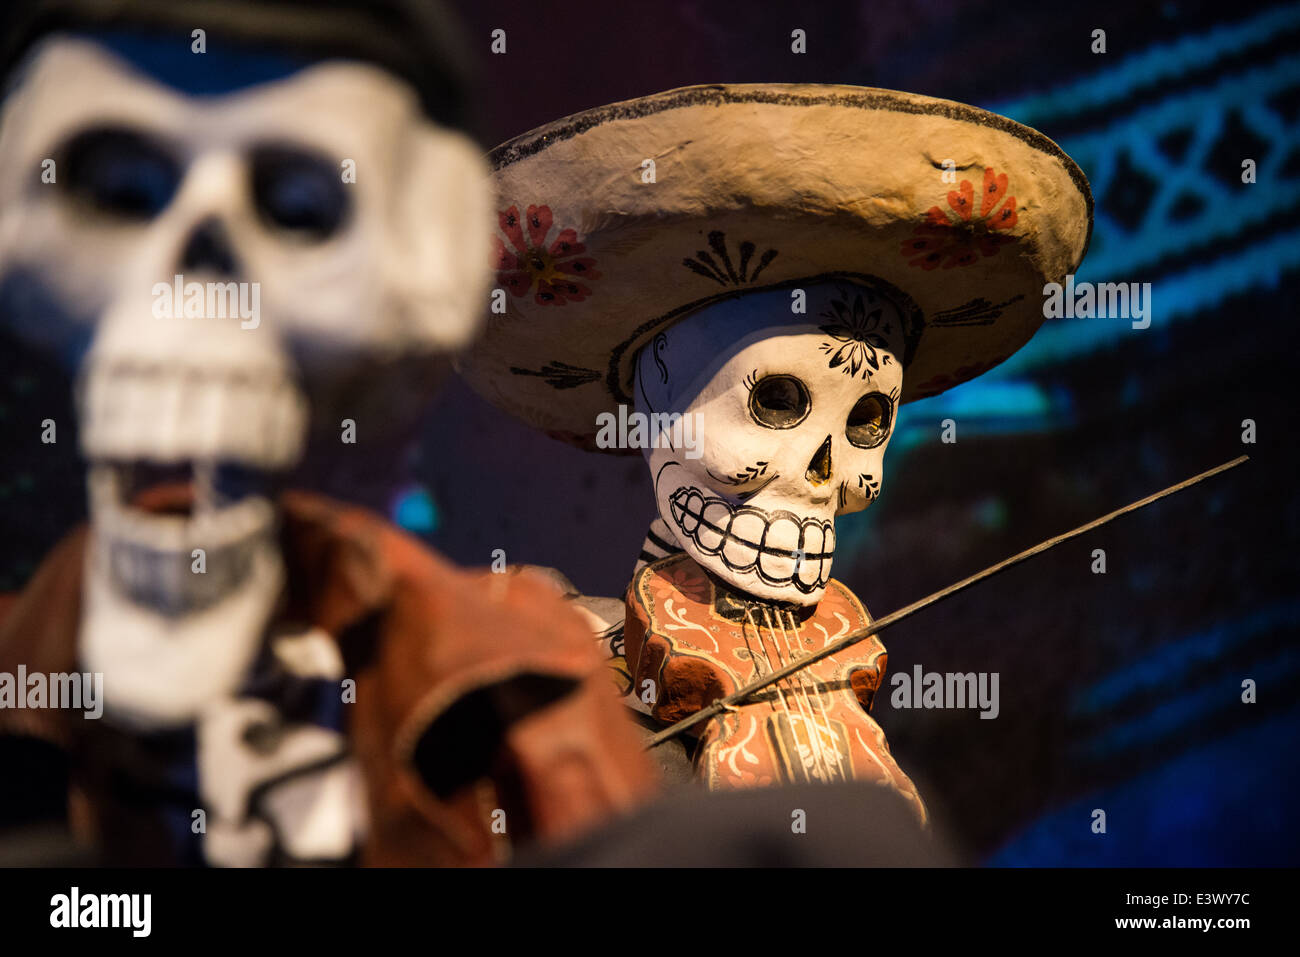 mexican paper mache figures at the etnographic museum of Leiden in Holland Stock Photo